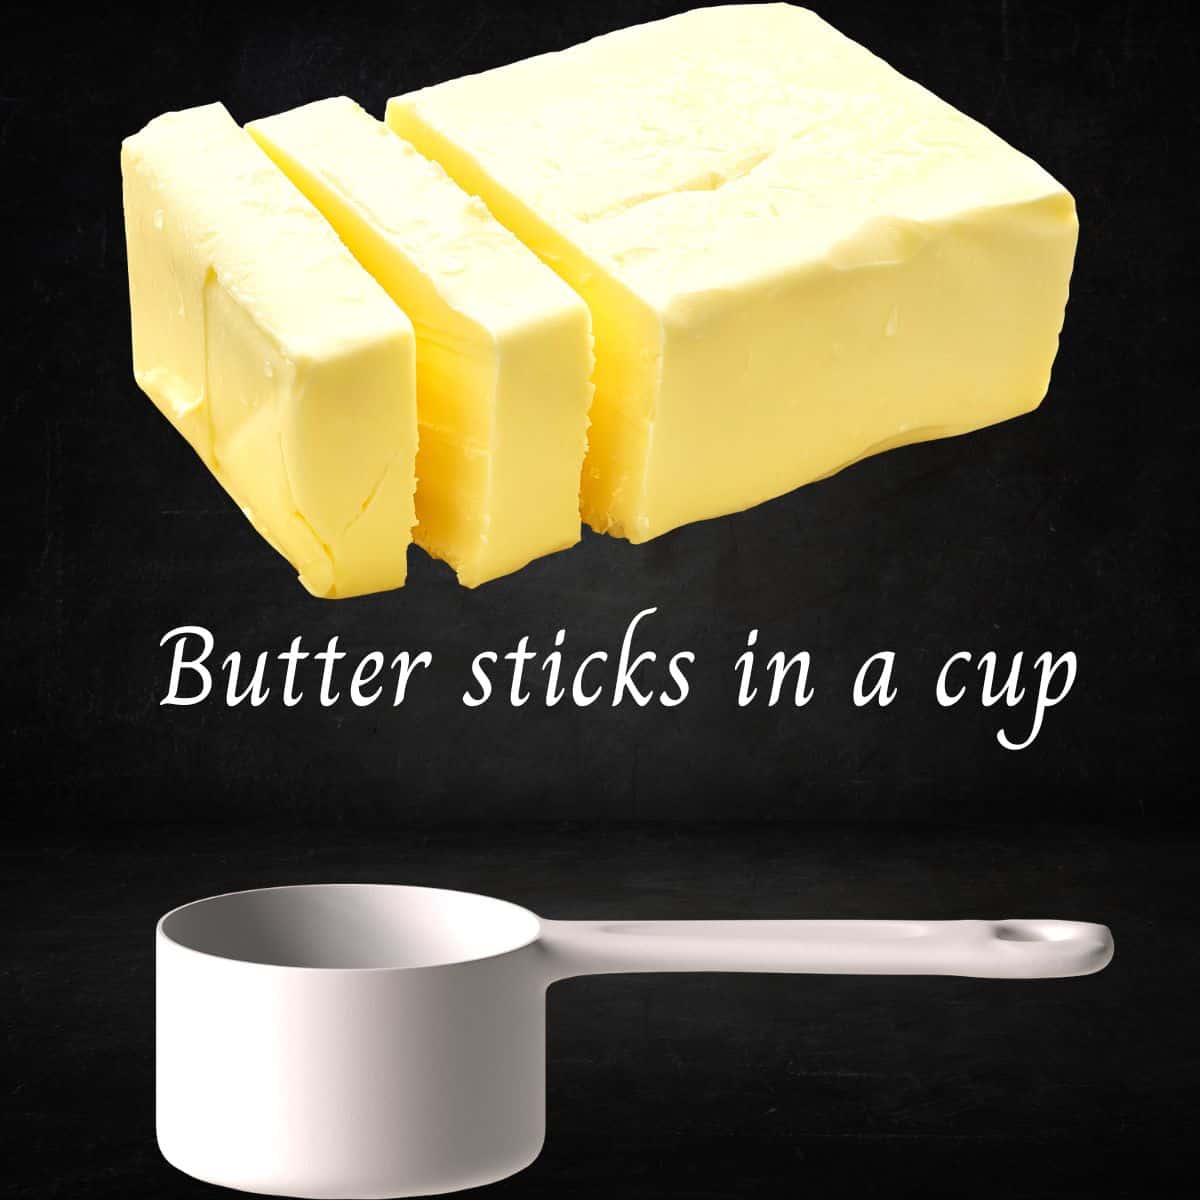 sticks of butter and a cup shown in the image